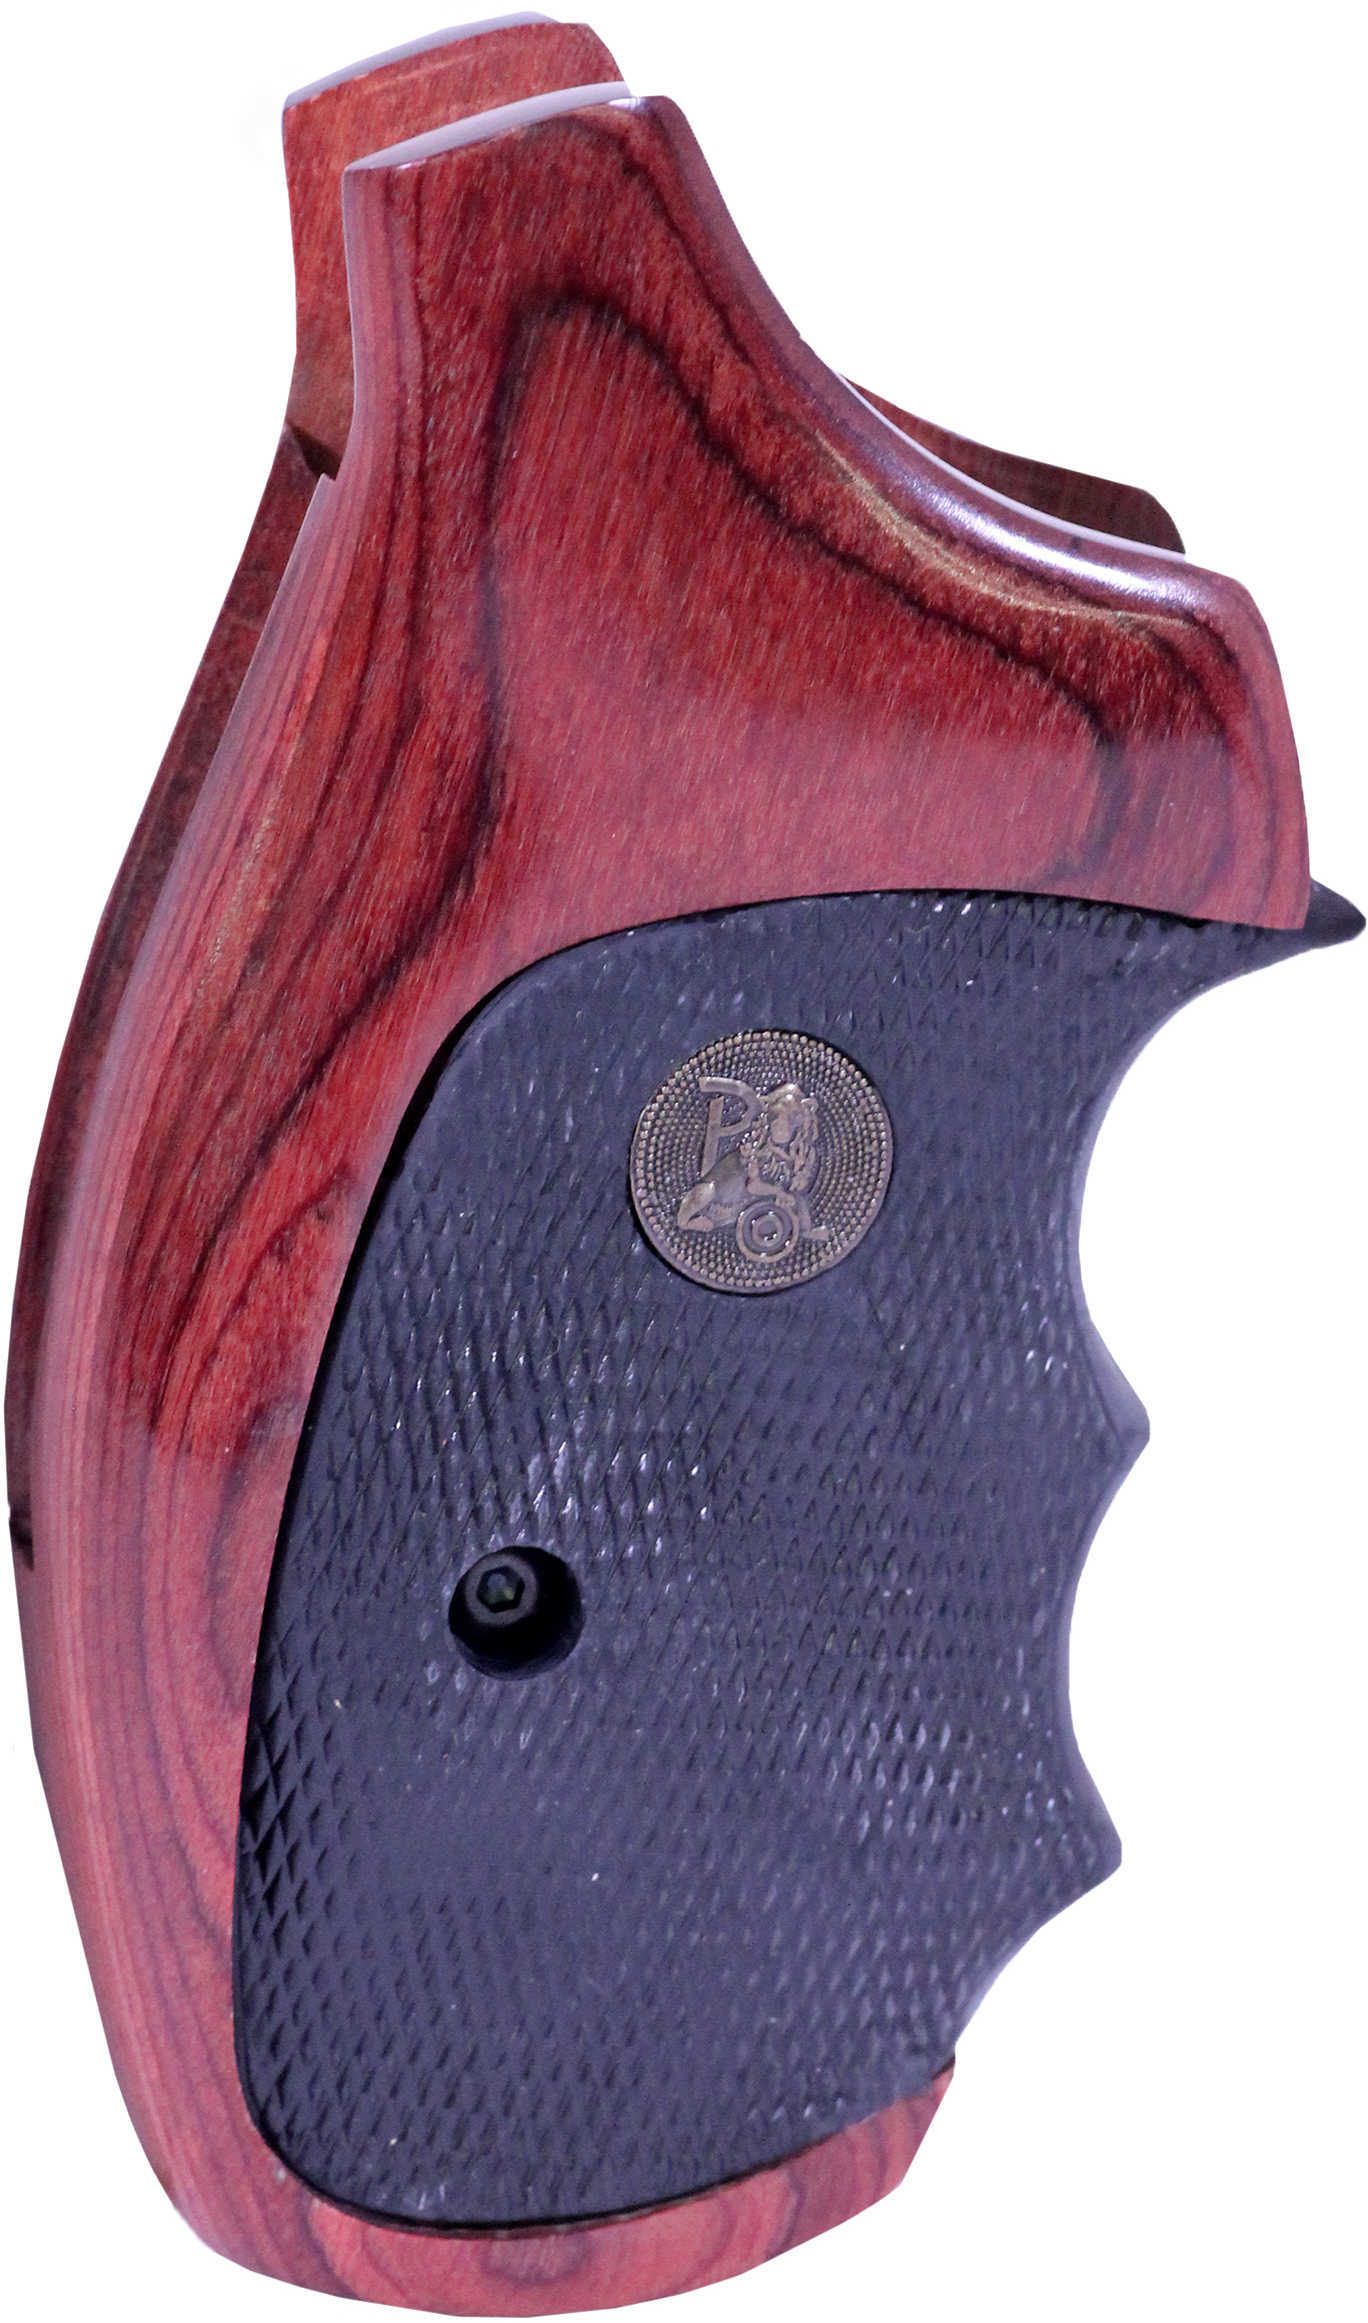 Pachmayr American Legend Grips S&W Revolvers J Frame Round Butt Rosewood